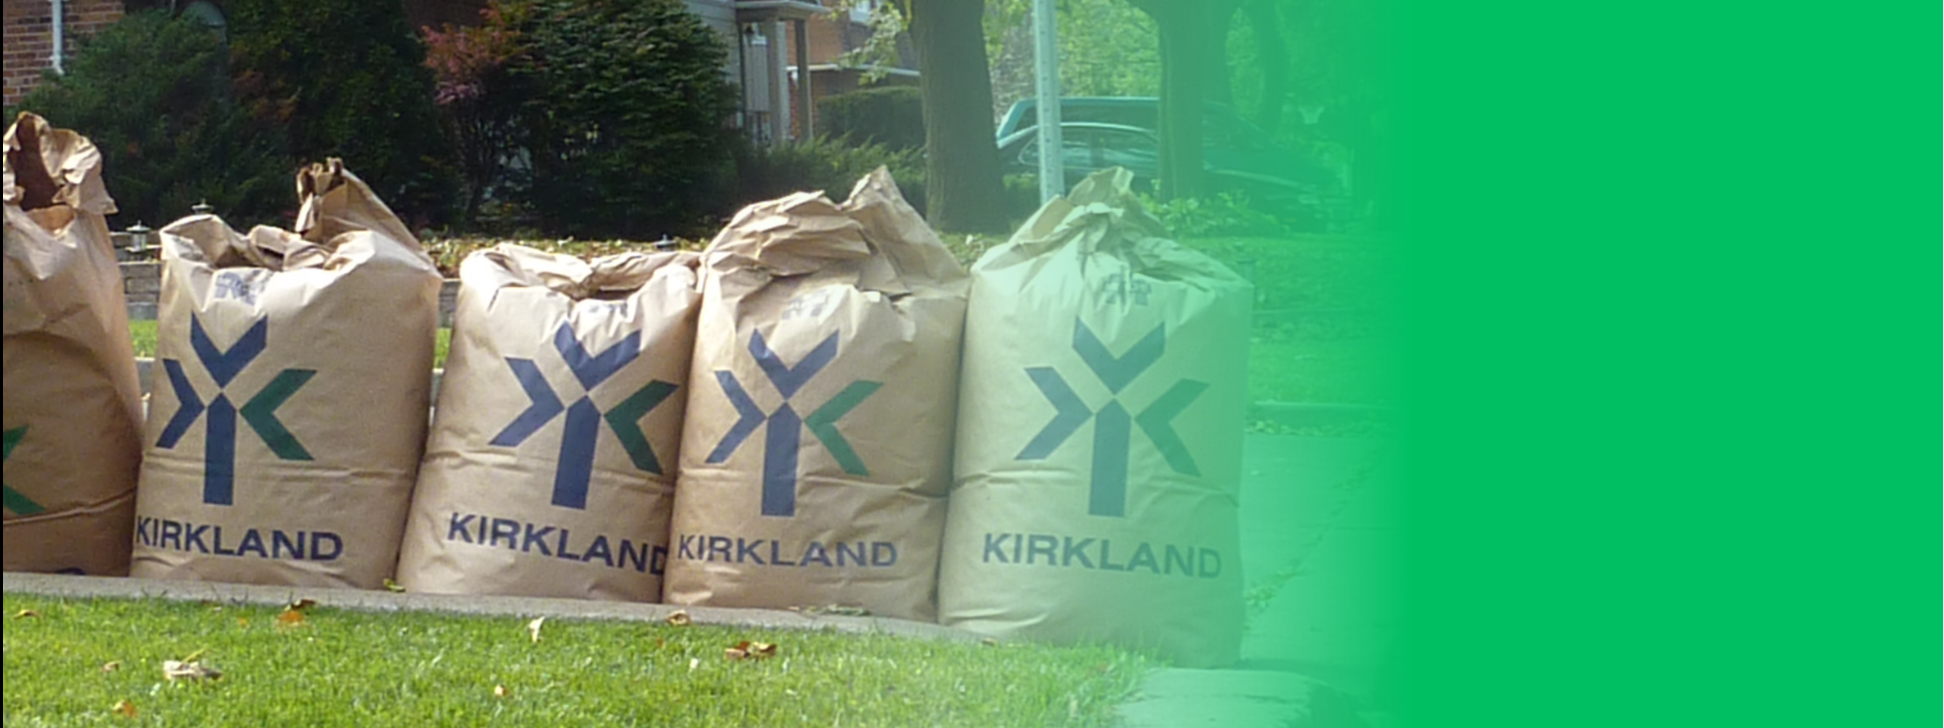 Green waste paper bags - Last chance!